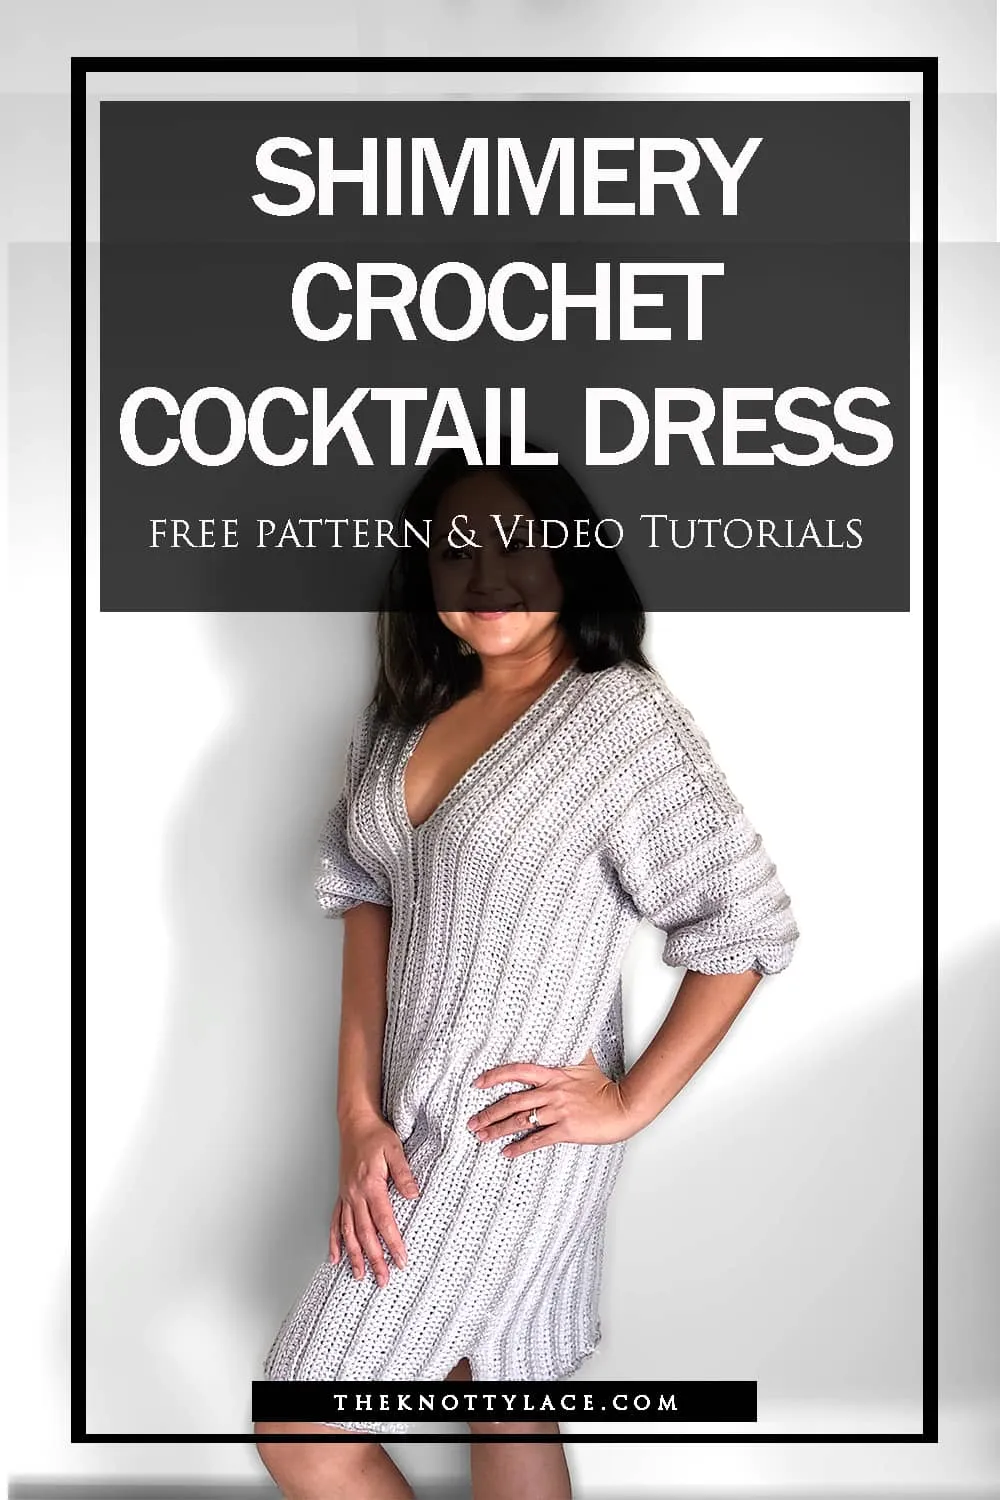 shimmery crochet cocktail dress free pattern and video tutorial